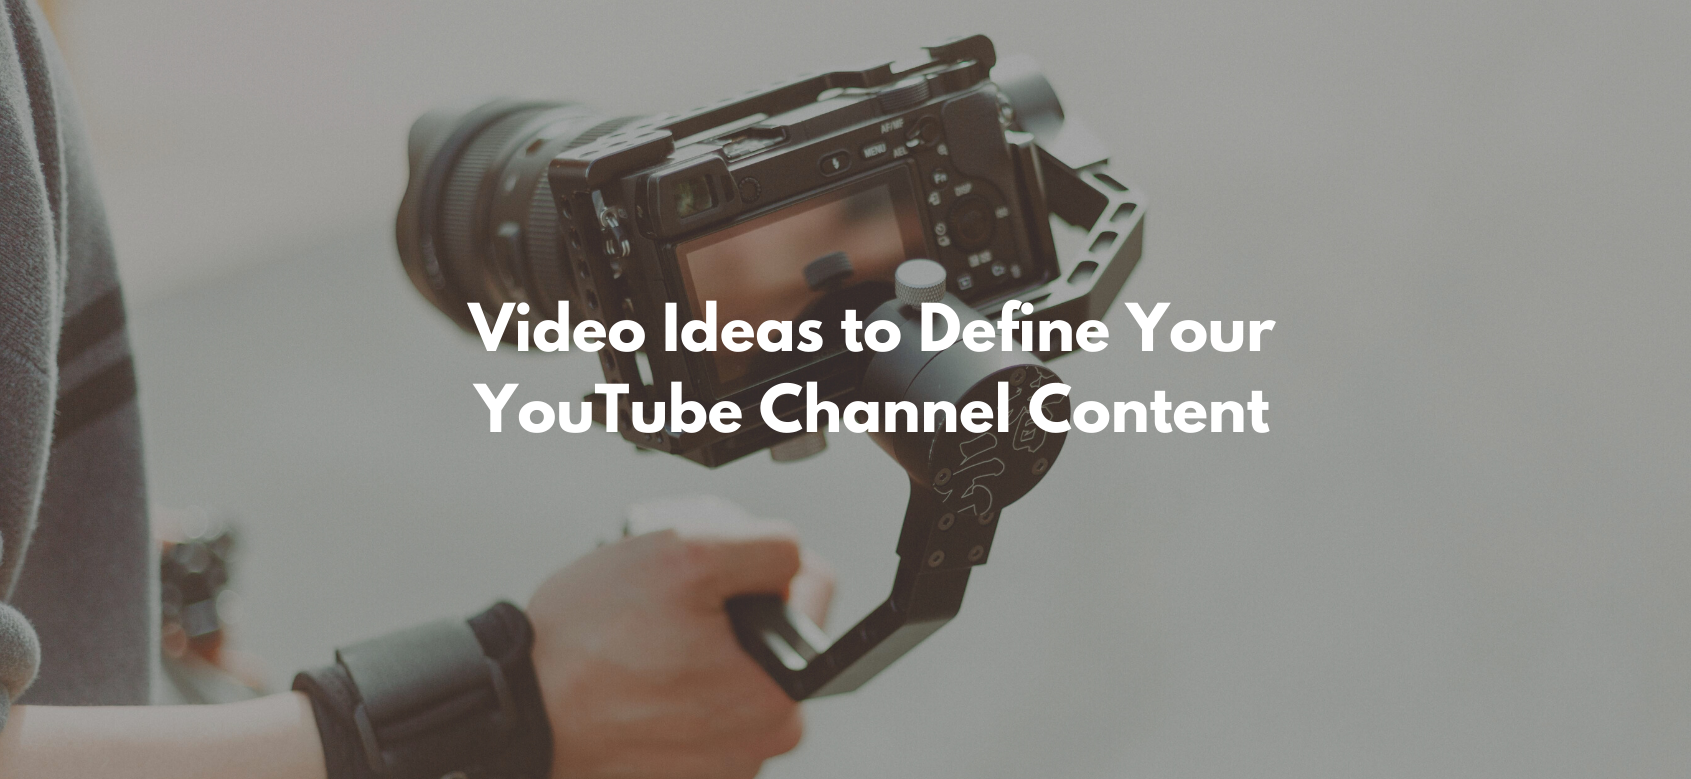 Video Ideas to Define Your YouTube Channel Content